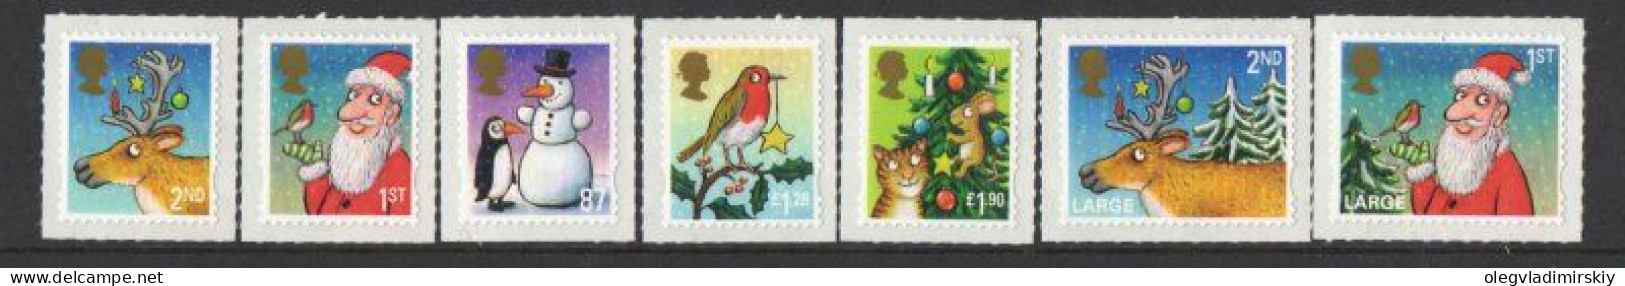 Great Britain United Kingdom 2012 Christmas Set Of 7 Self-adhesive Stamps MNH - Weihnachten